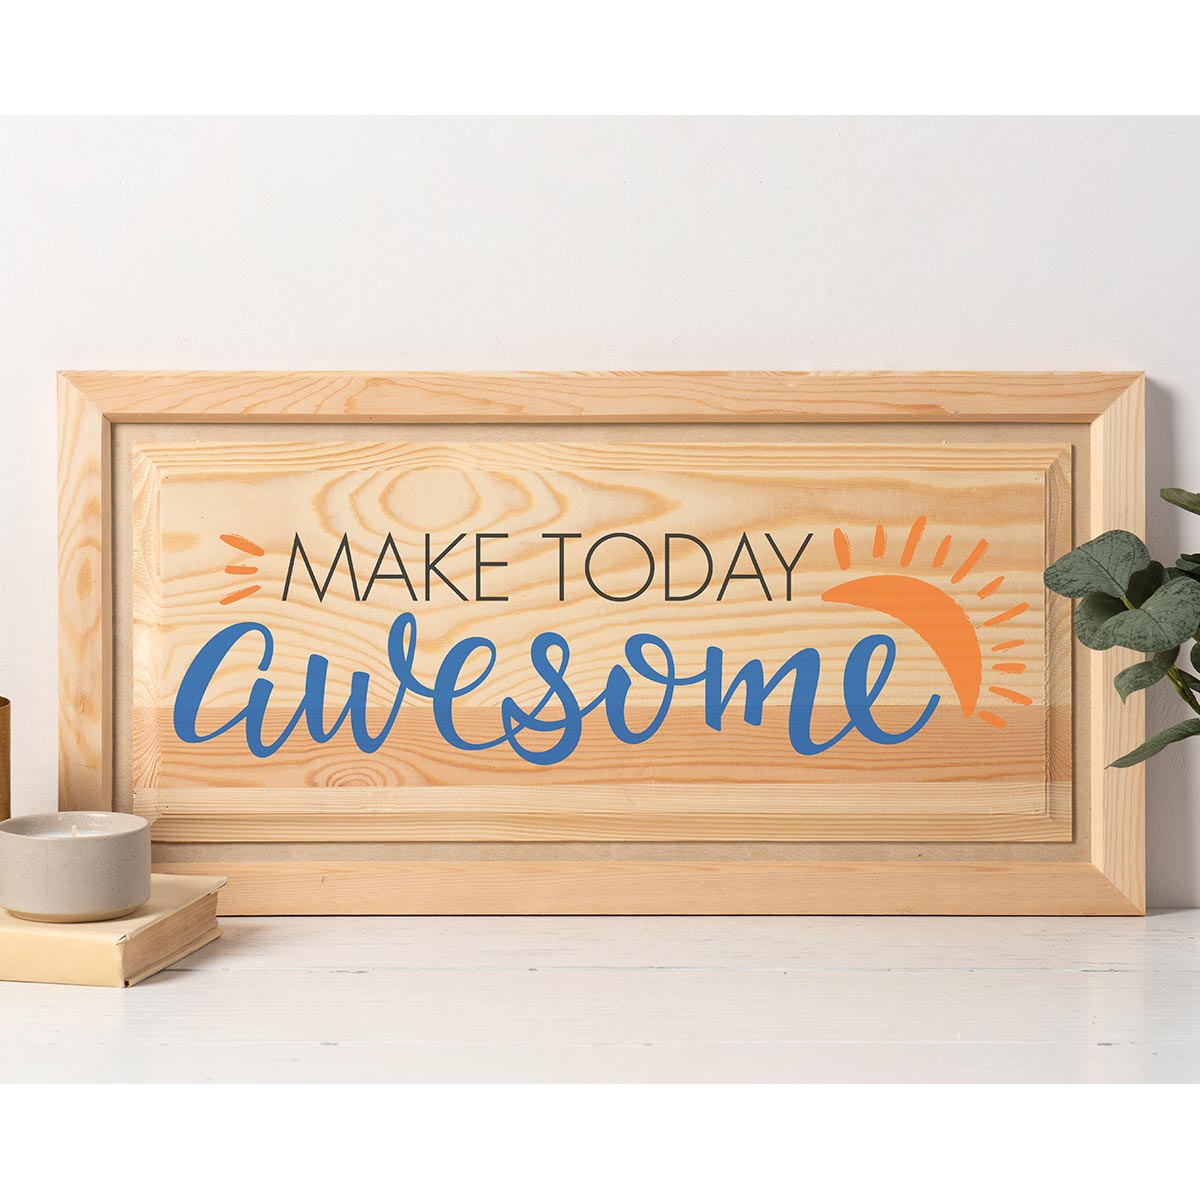 FolkArt ® Sign Shop™ Mesh Stencil - Make Today Awesome - 63385